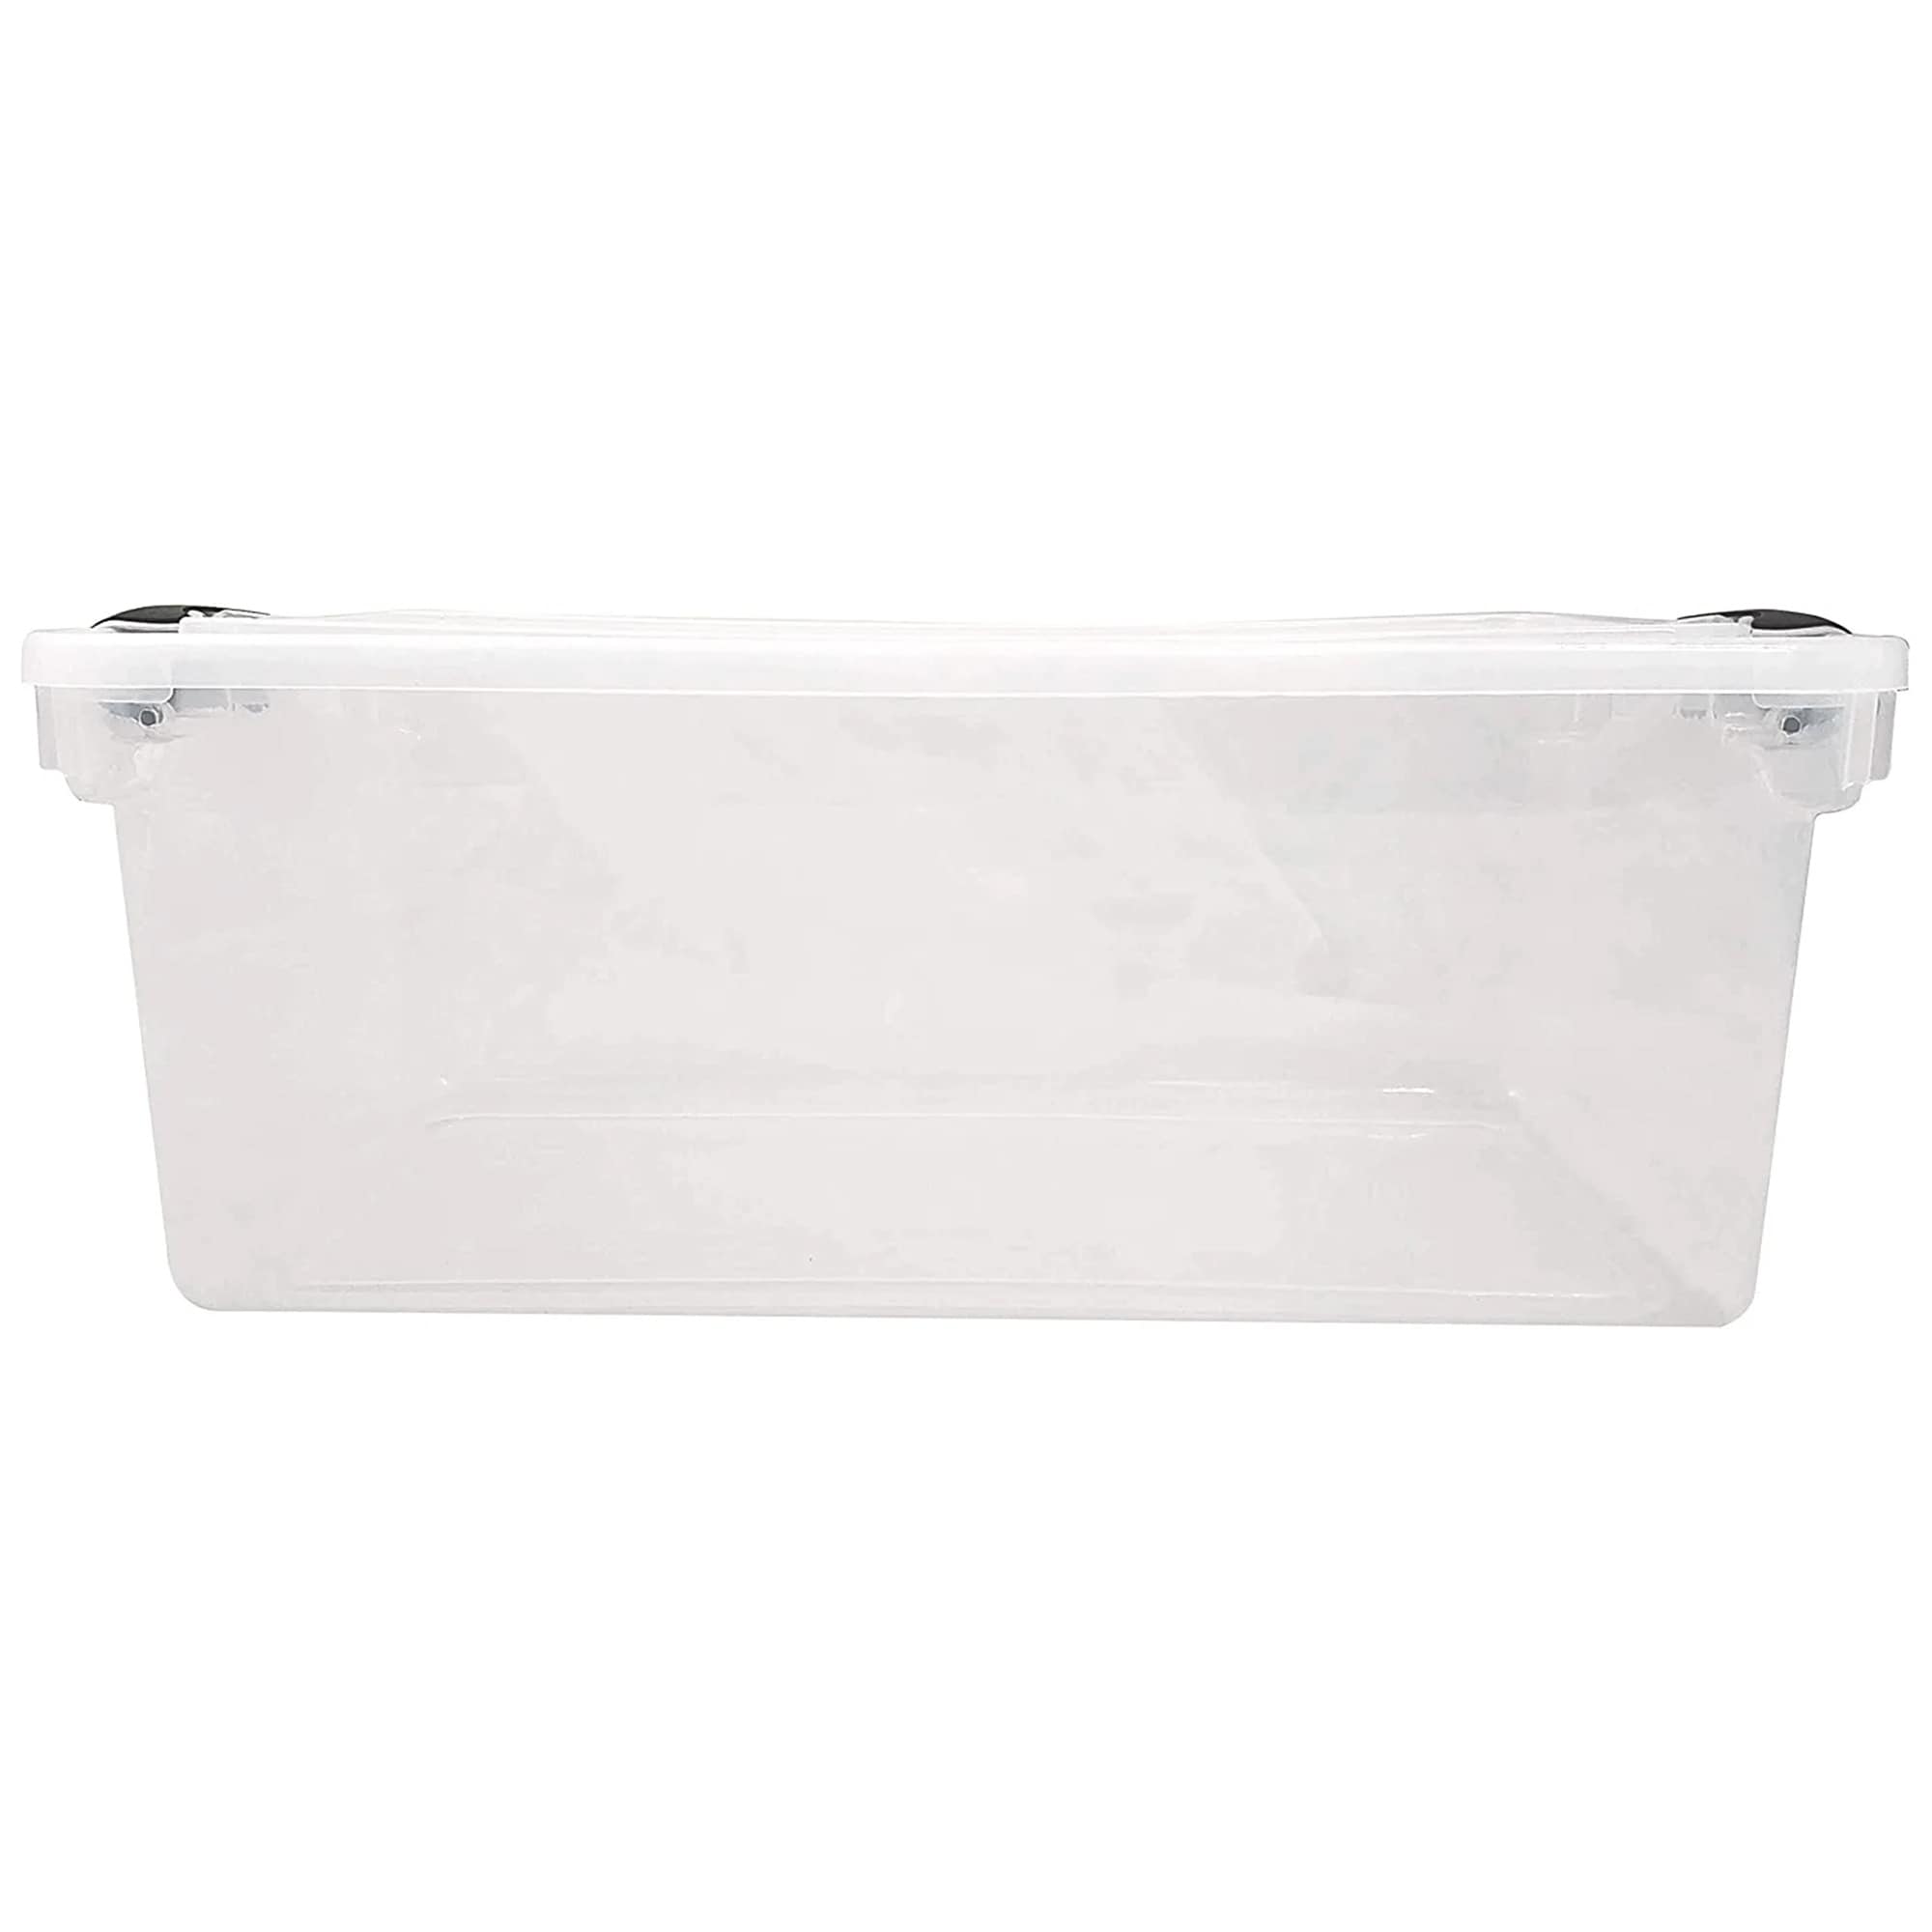 https://ak1.ostkcdn.com/images/products/is/images/direct/ba60496a60113d97ffc8e4a2c8eee60cbf3d4075/Homz-66-Qt-Clear-Storage-Organizing-Container-Bin-with-Latching-Lids-%284-Pack%29.jpg